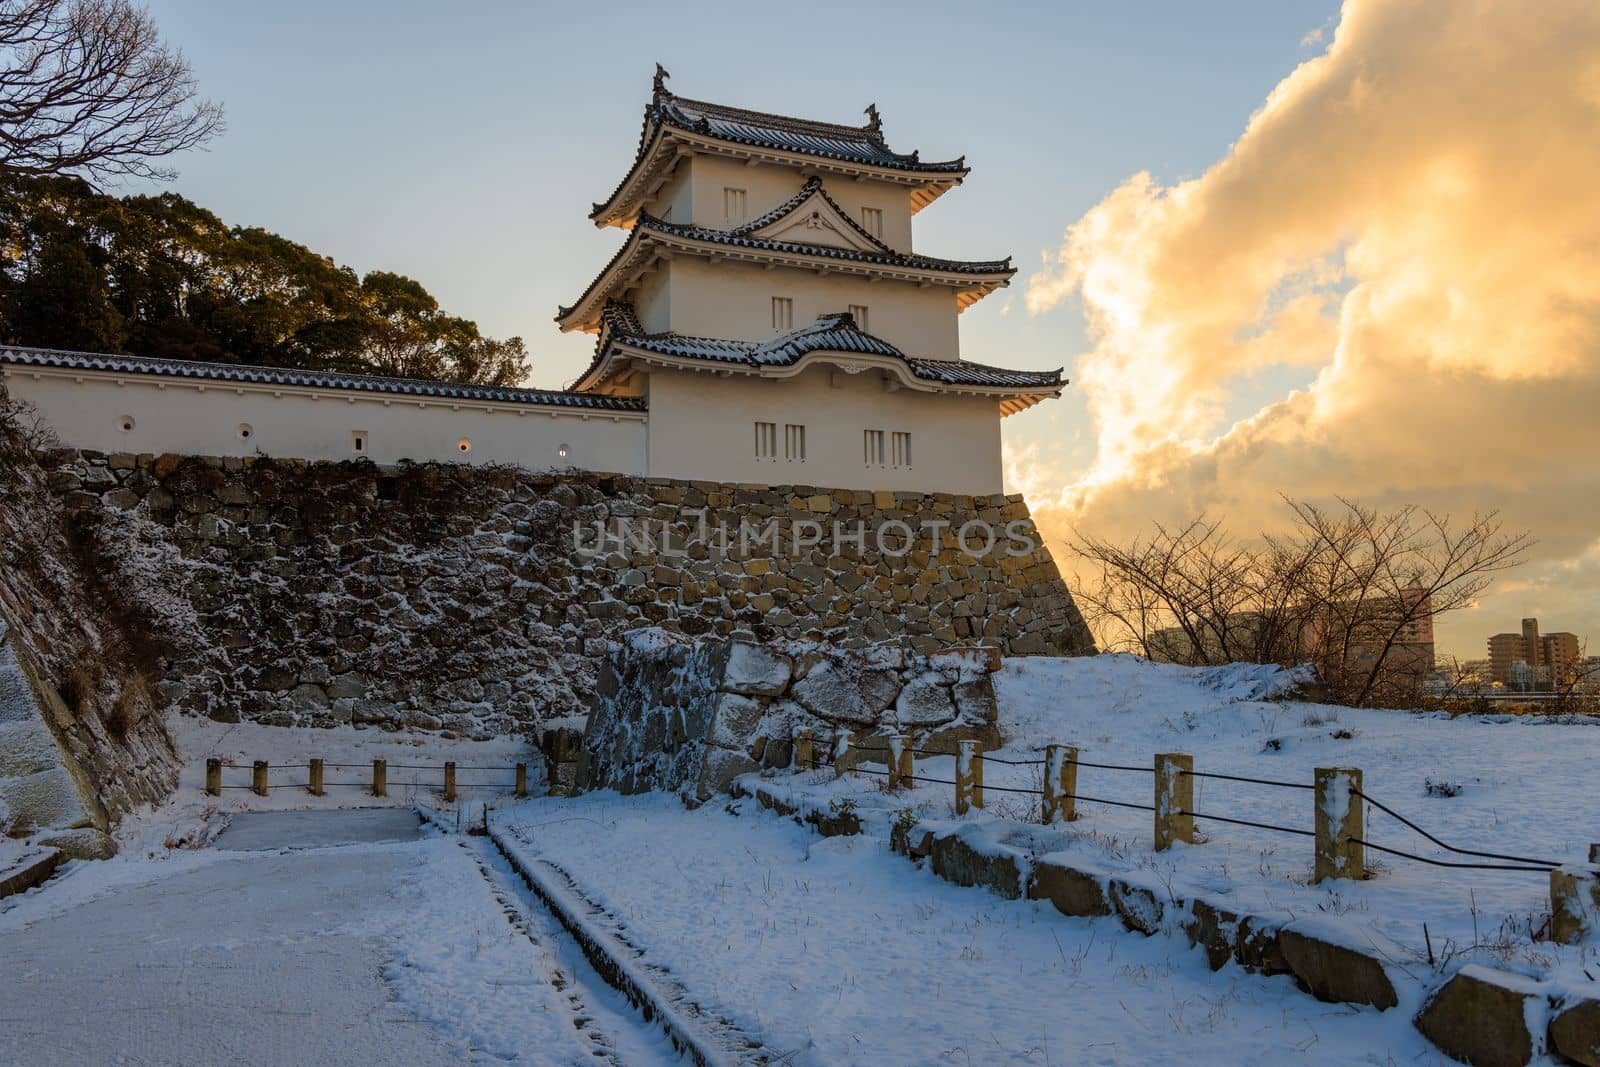 Akashi Castle tower and stone walls in snowy landscape at sunrise. High quality photo